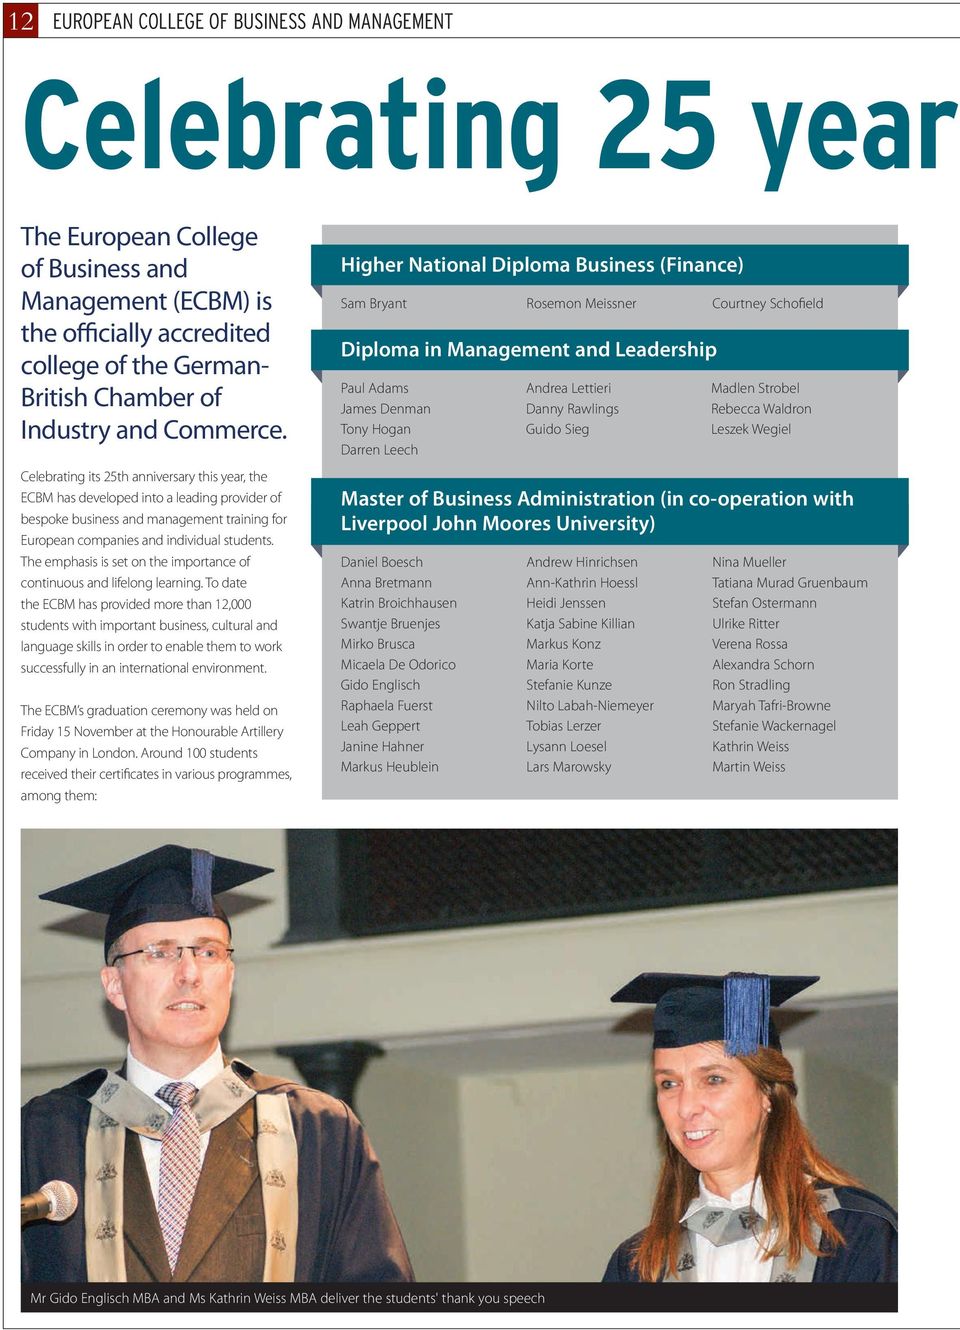 Celebrating its 25th anniversary this year, the ECBM has developed into a leading provider of bespoke business and management training for European companies and individual students.